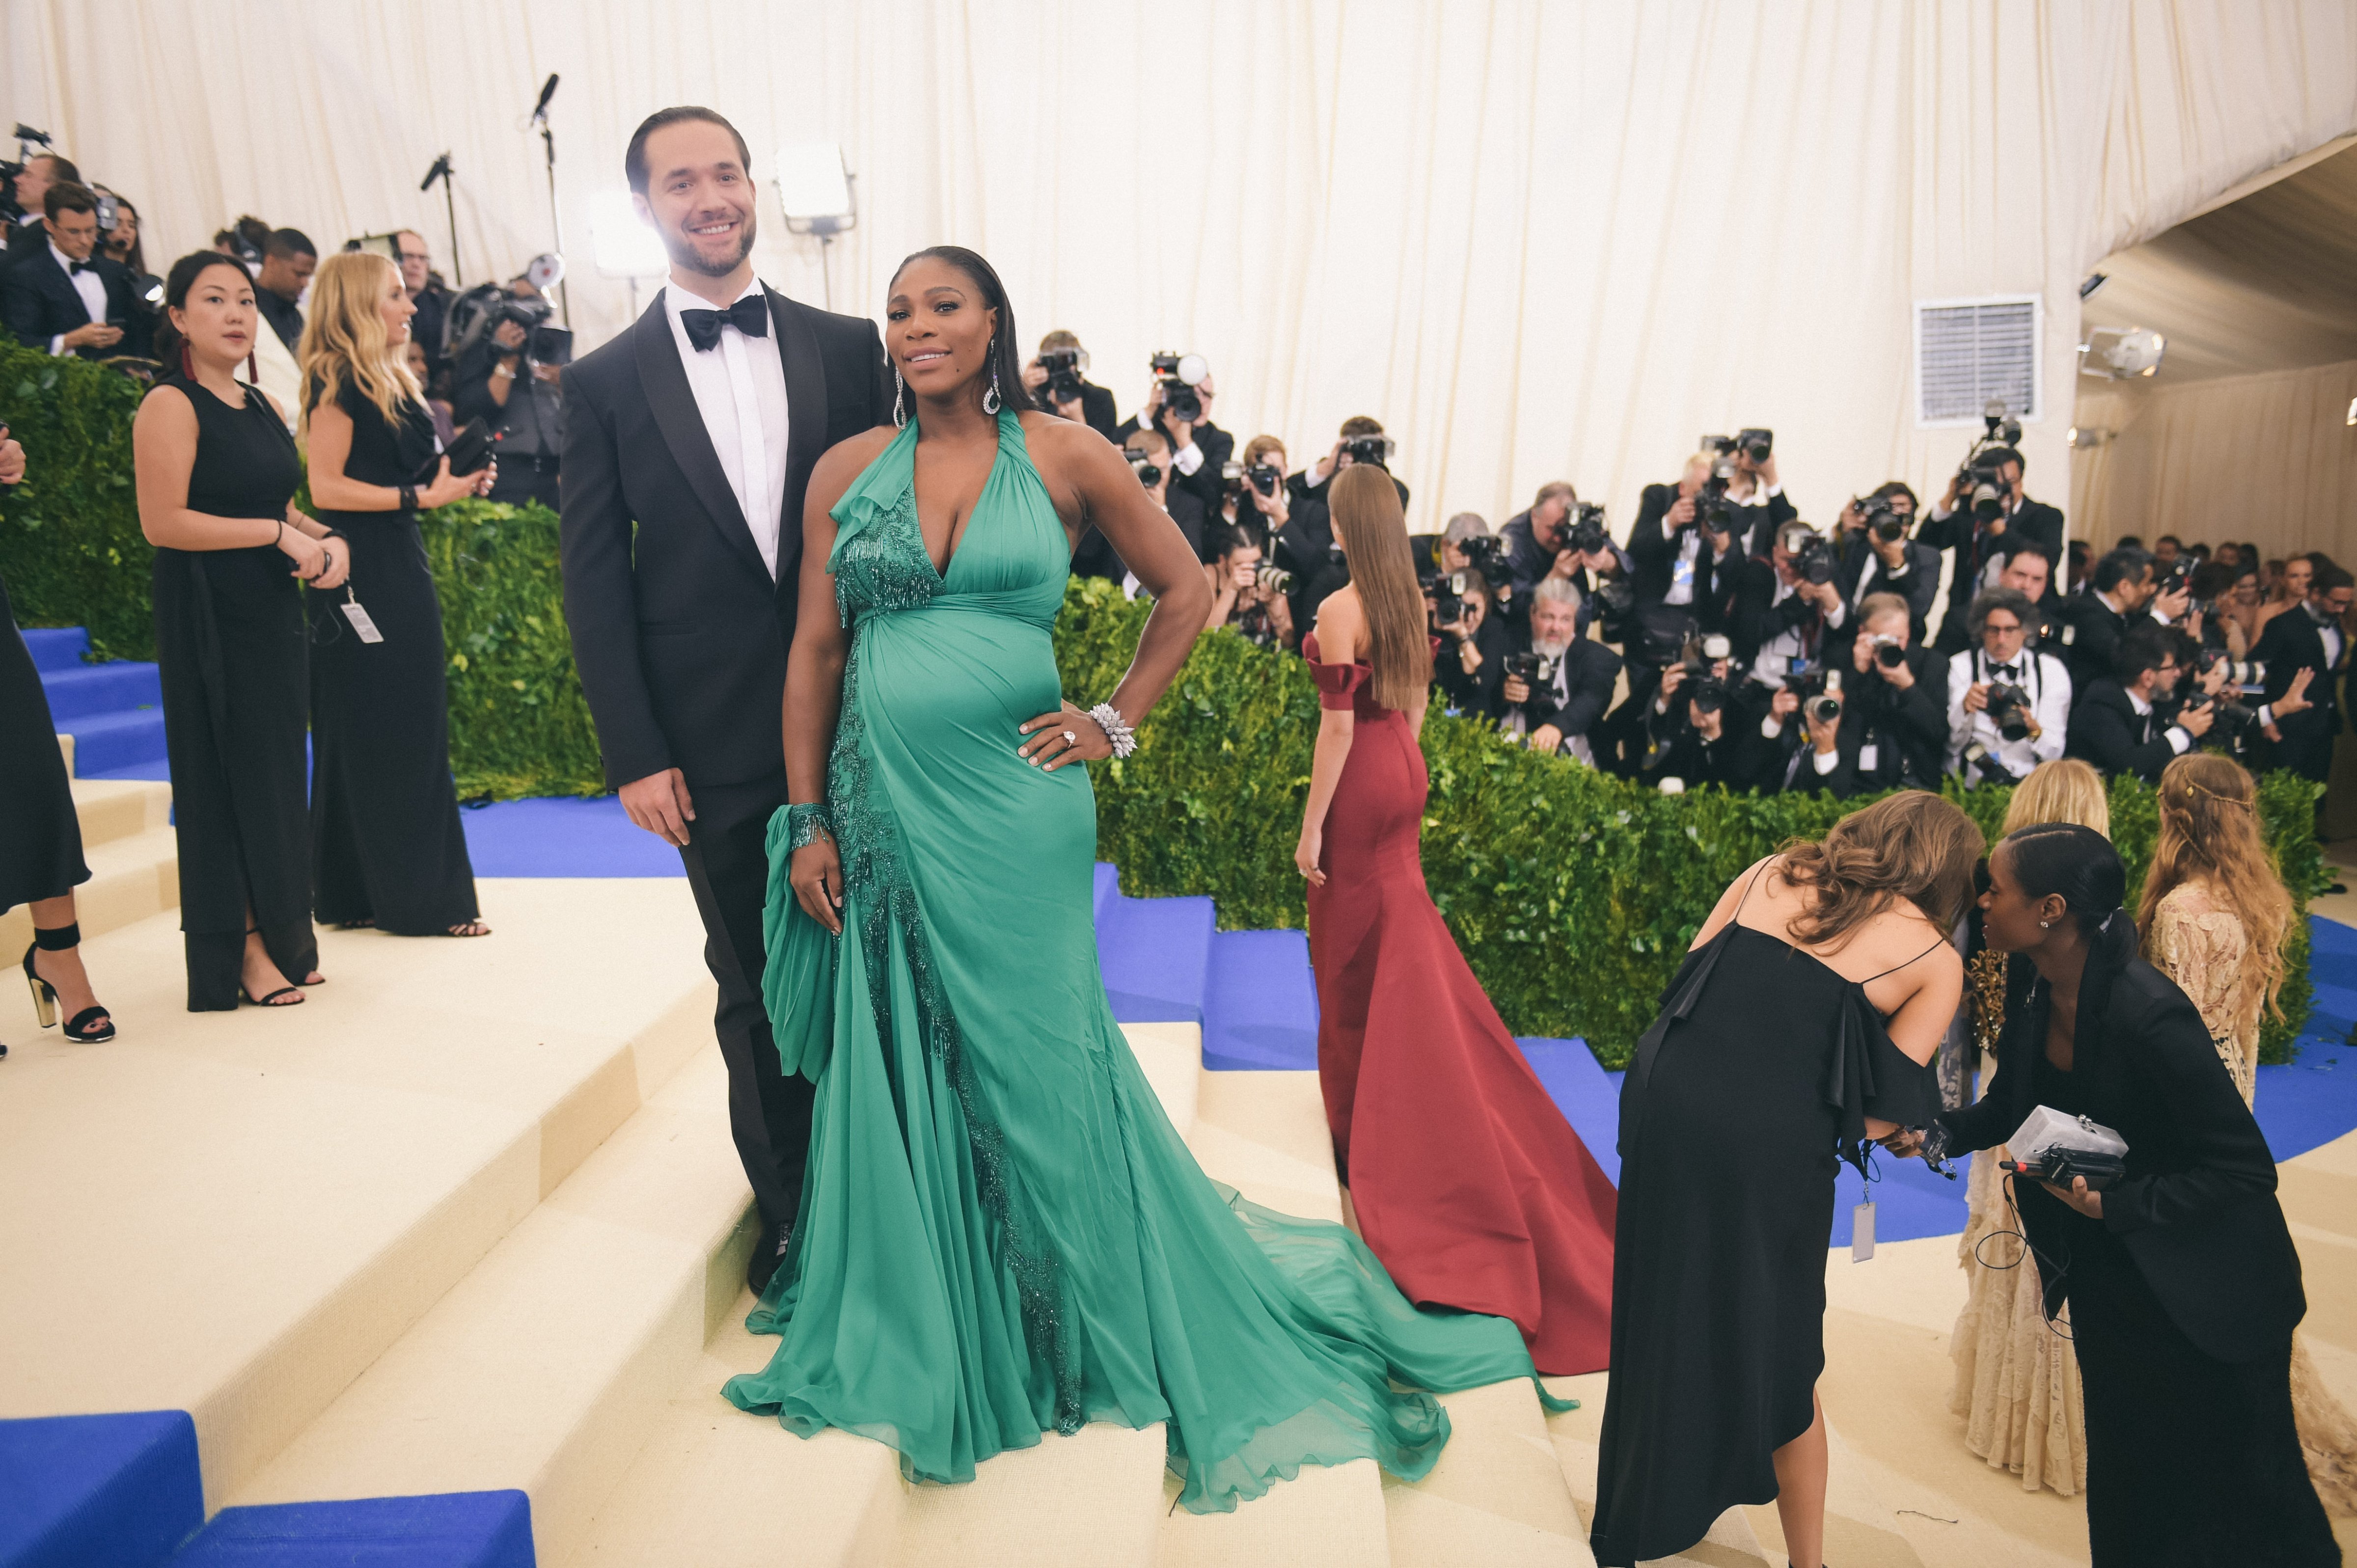 NEW YORK, NY - MAY 01: Alexis Ohanian and Serena Williams attend the "Rei Kawakubo/Comme des Garcons: Art Of The In-Between" Costume Institute Gala at Metropolitan Museum of Art on May 1, 2017 in New York City. (Photo by J. Kempin/Getty Images) (J. Kempin—Getty Images)